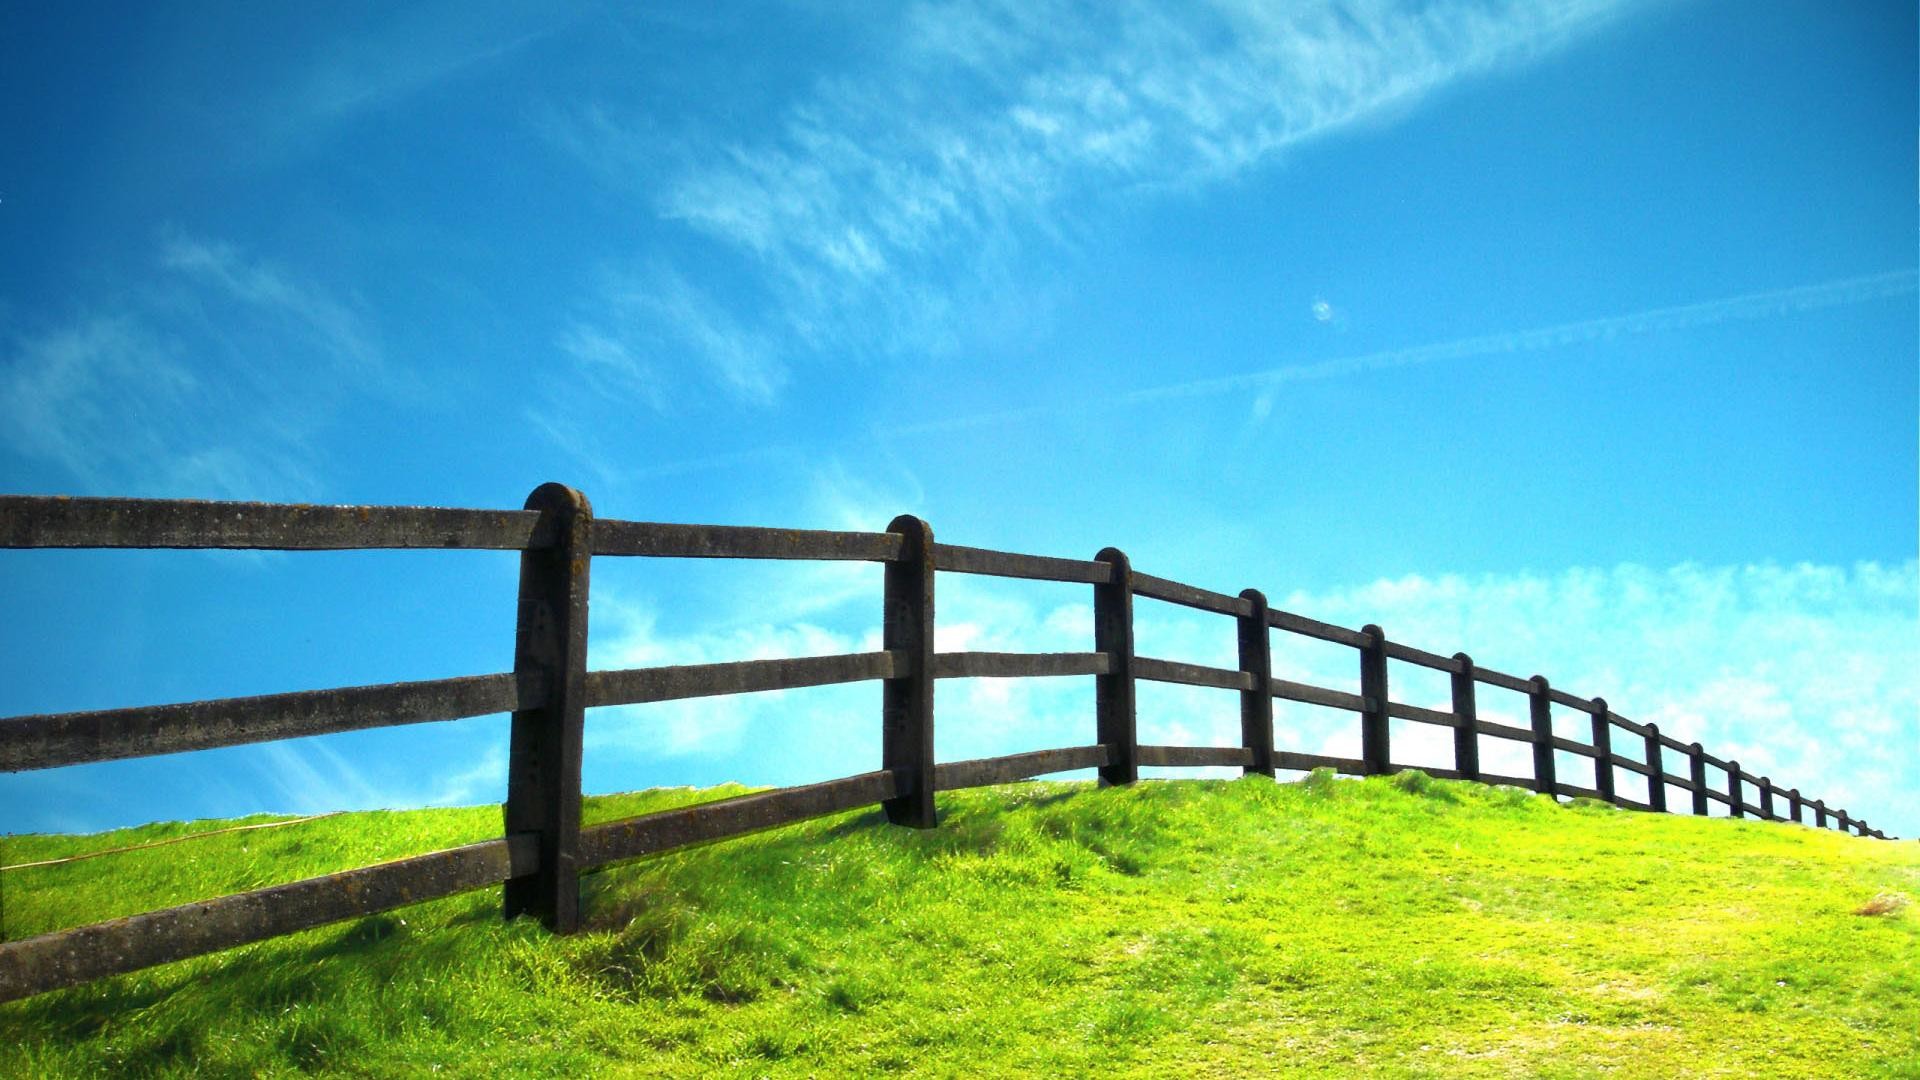 Hd Grassland And Fence Nature Scenery Background Widescreen - Scenery  Background Images Hd - 1920x1080 Wallpaper 